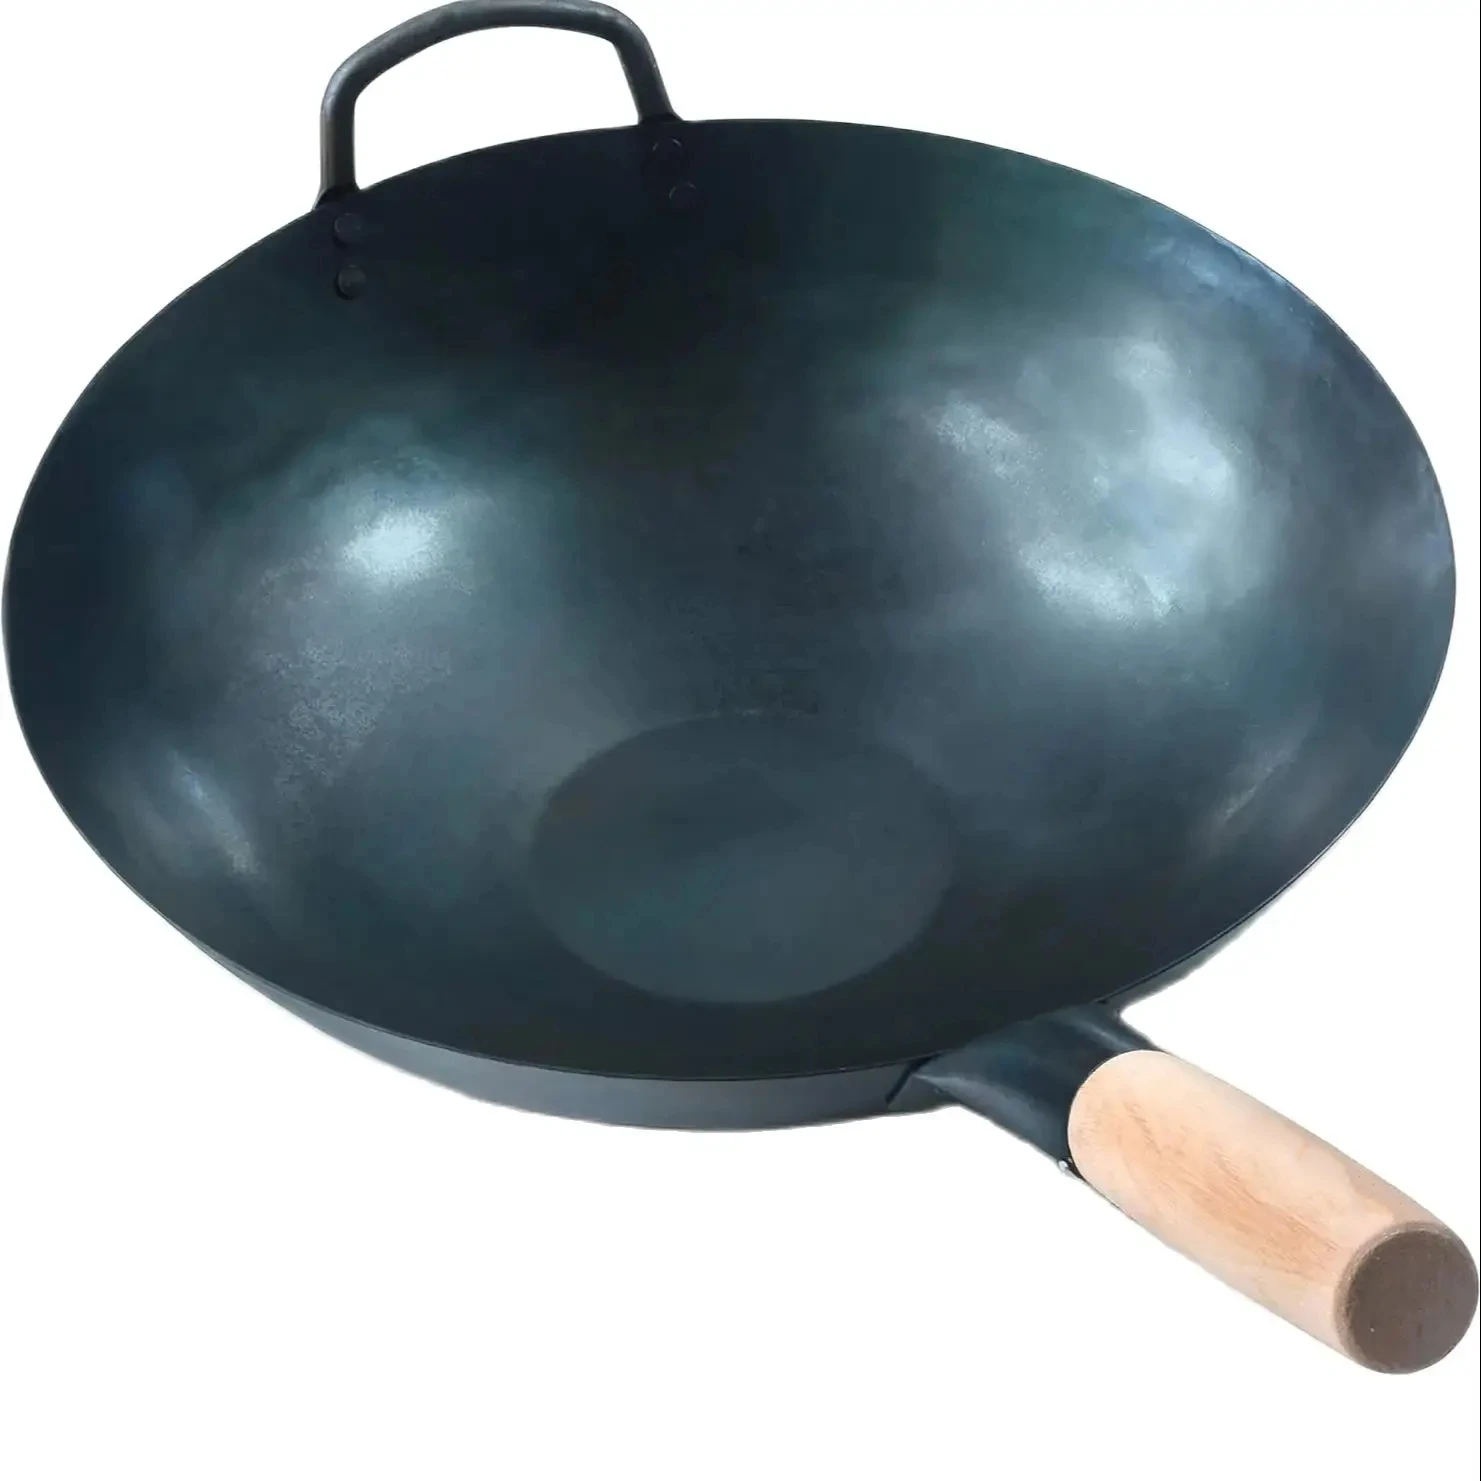 

Chinese Pow Wok, Seasoned Special for Circular Bottom, Gas Stove Wok, Traditional Hand Hammered, Stir Fry Pa, 10.2 Inch